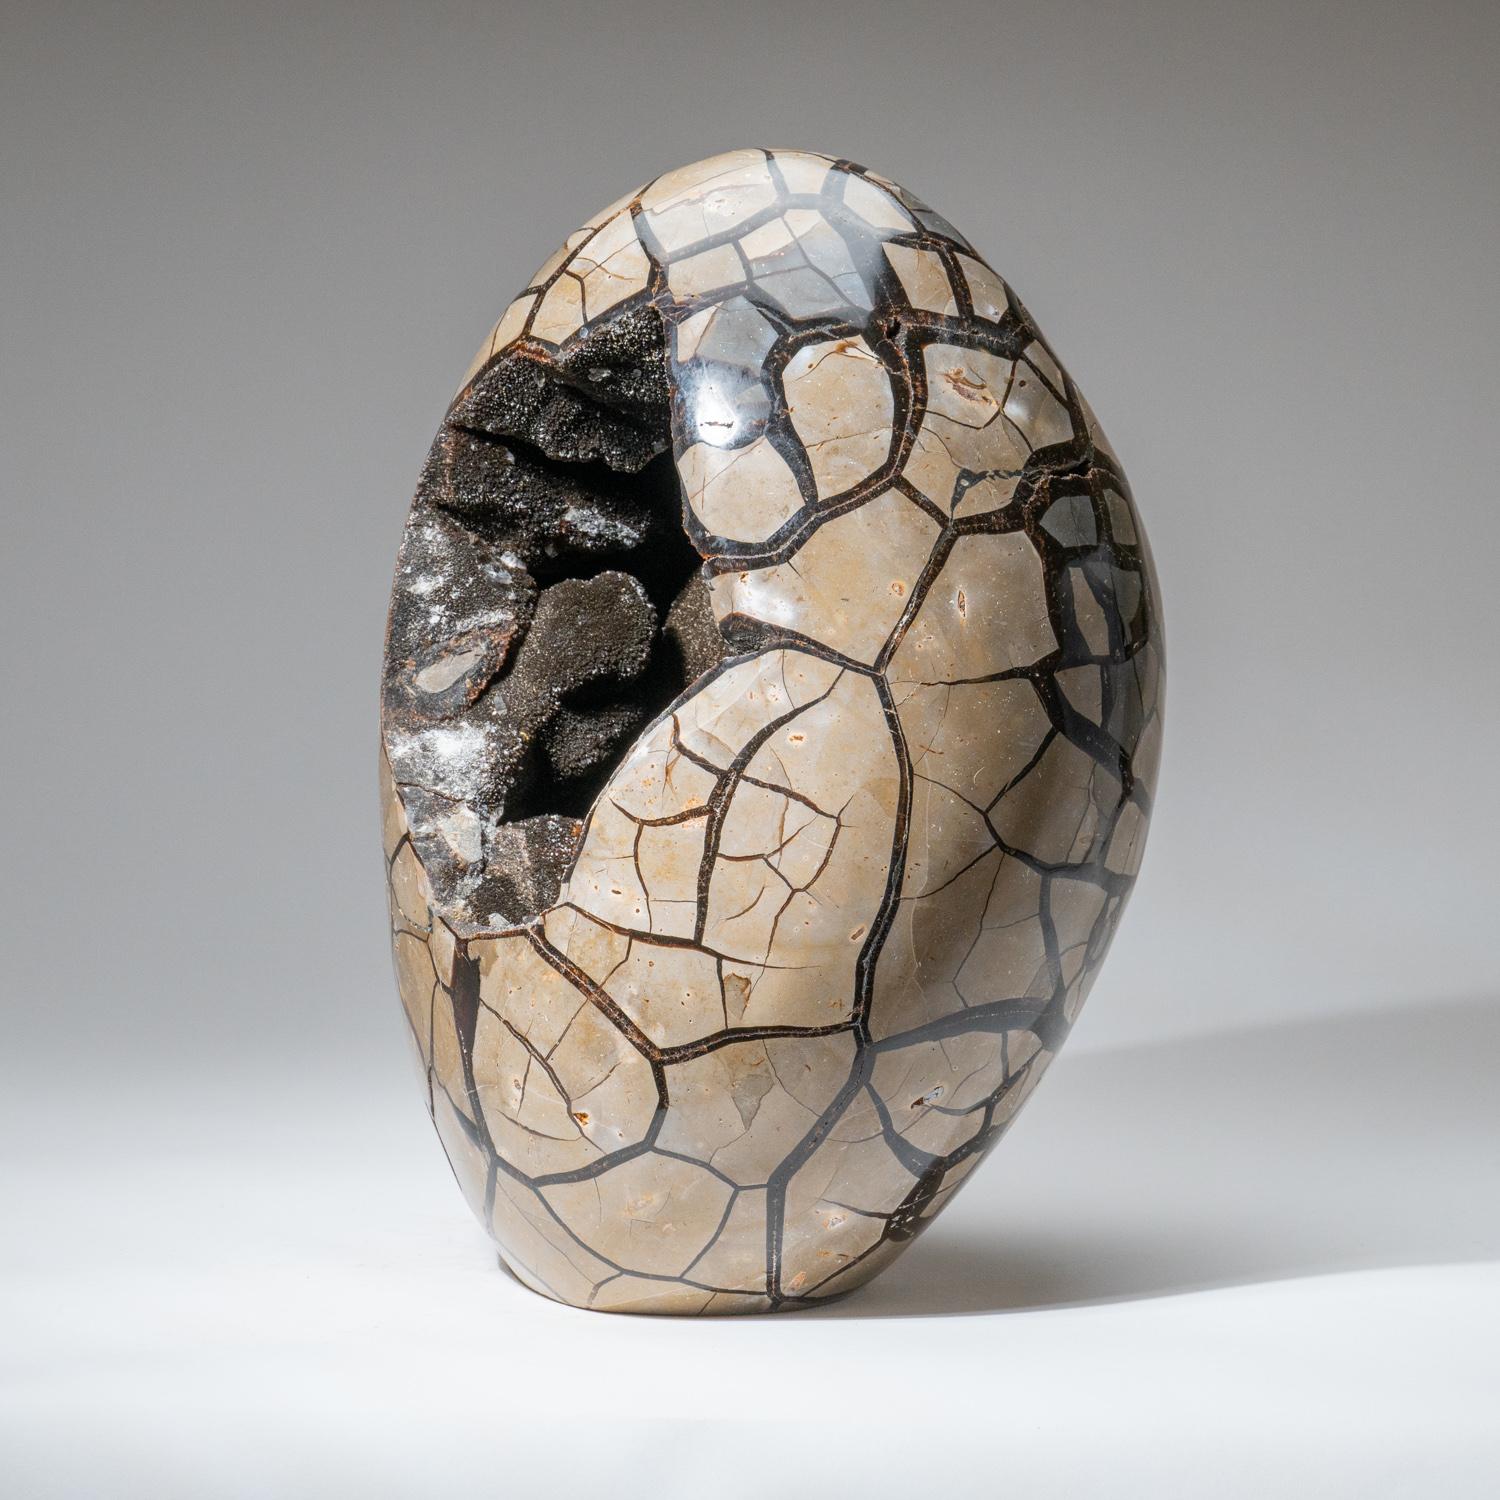 This 44.5 lb AAA quality Septarian Druzy Geode Egg from Madagascar features an exposed area lined with dazzling druzy quartz crystals, as well as a polished back side, providing a high reflective surface. Septarian is a combination of yellow